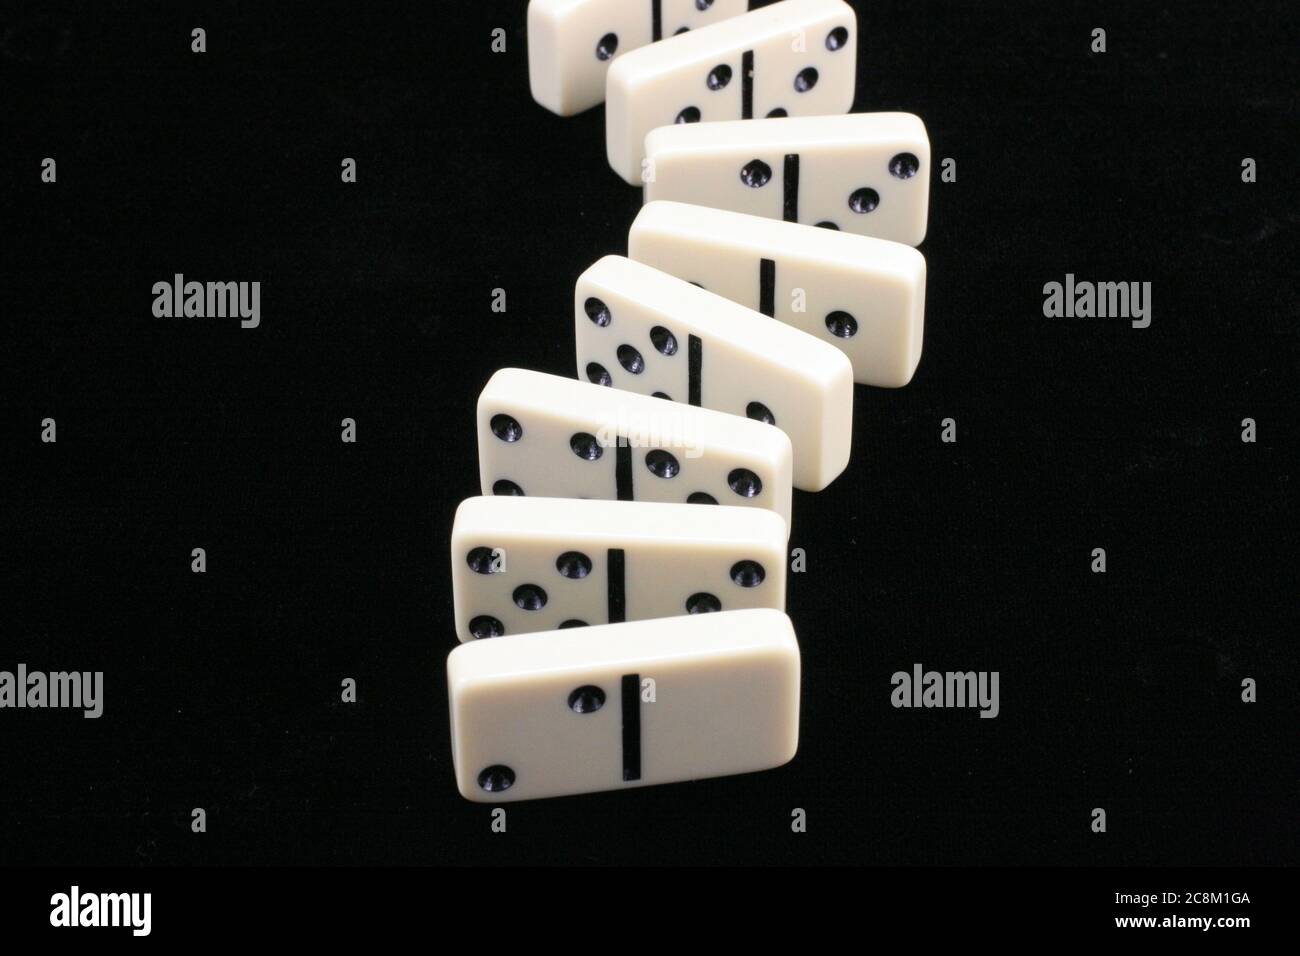 Game of white dominoes on a black background Stock Photo